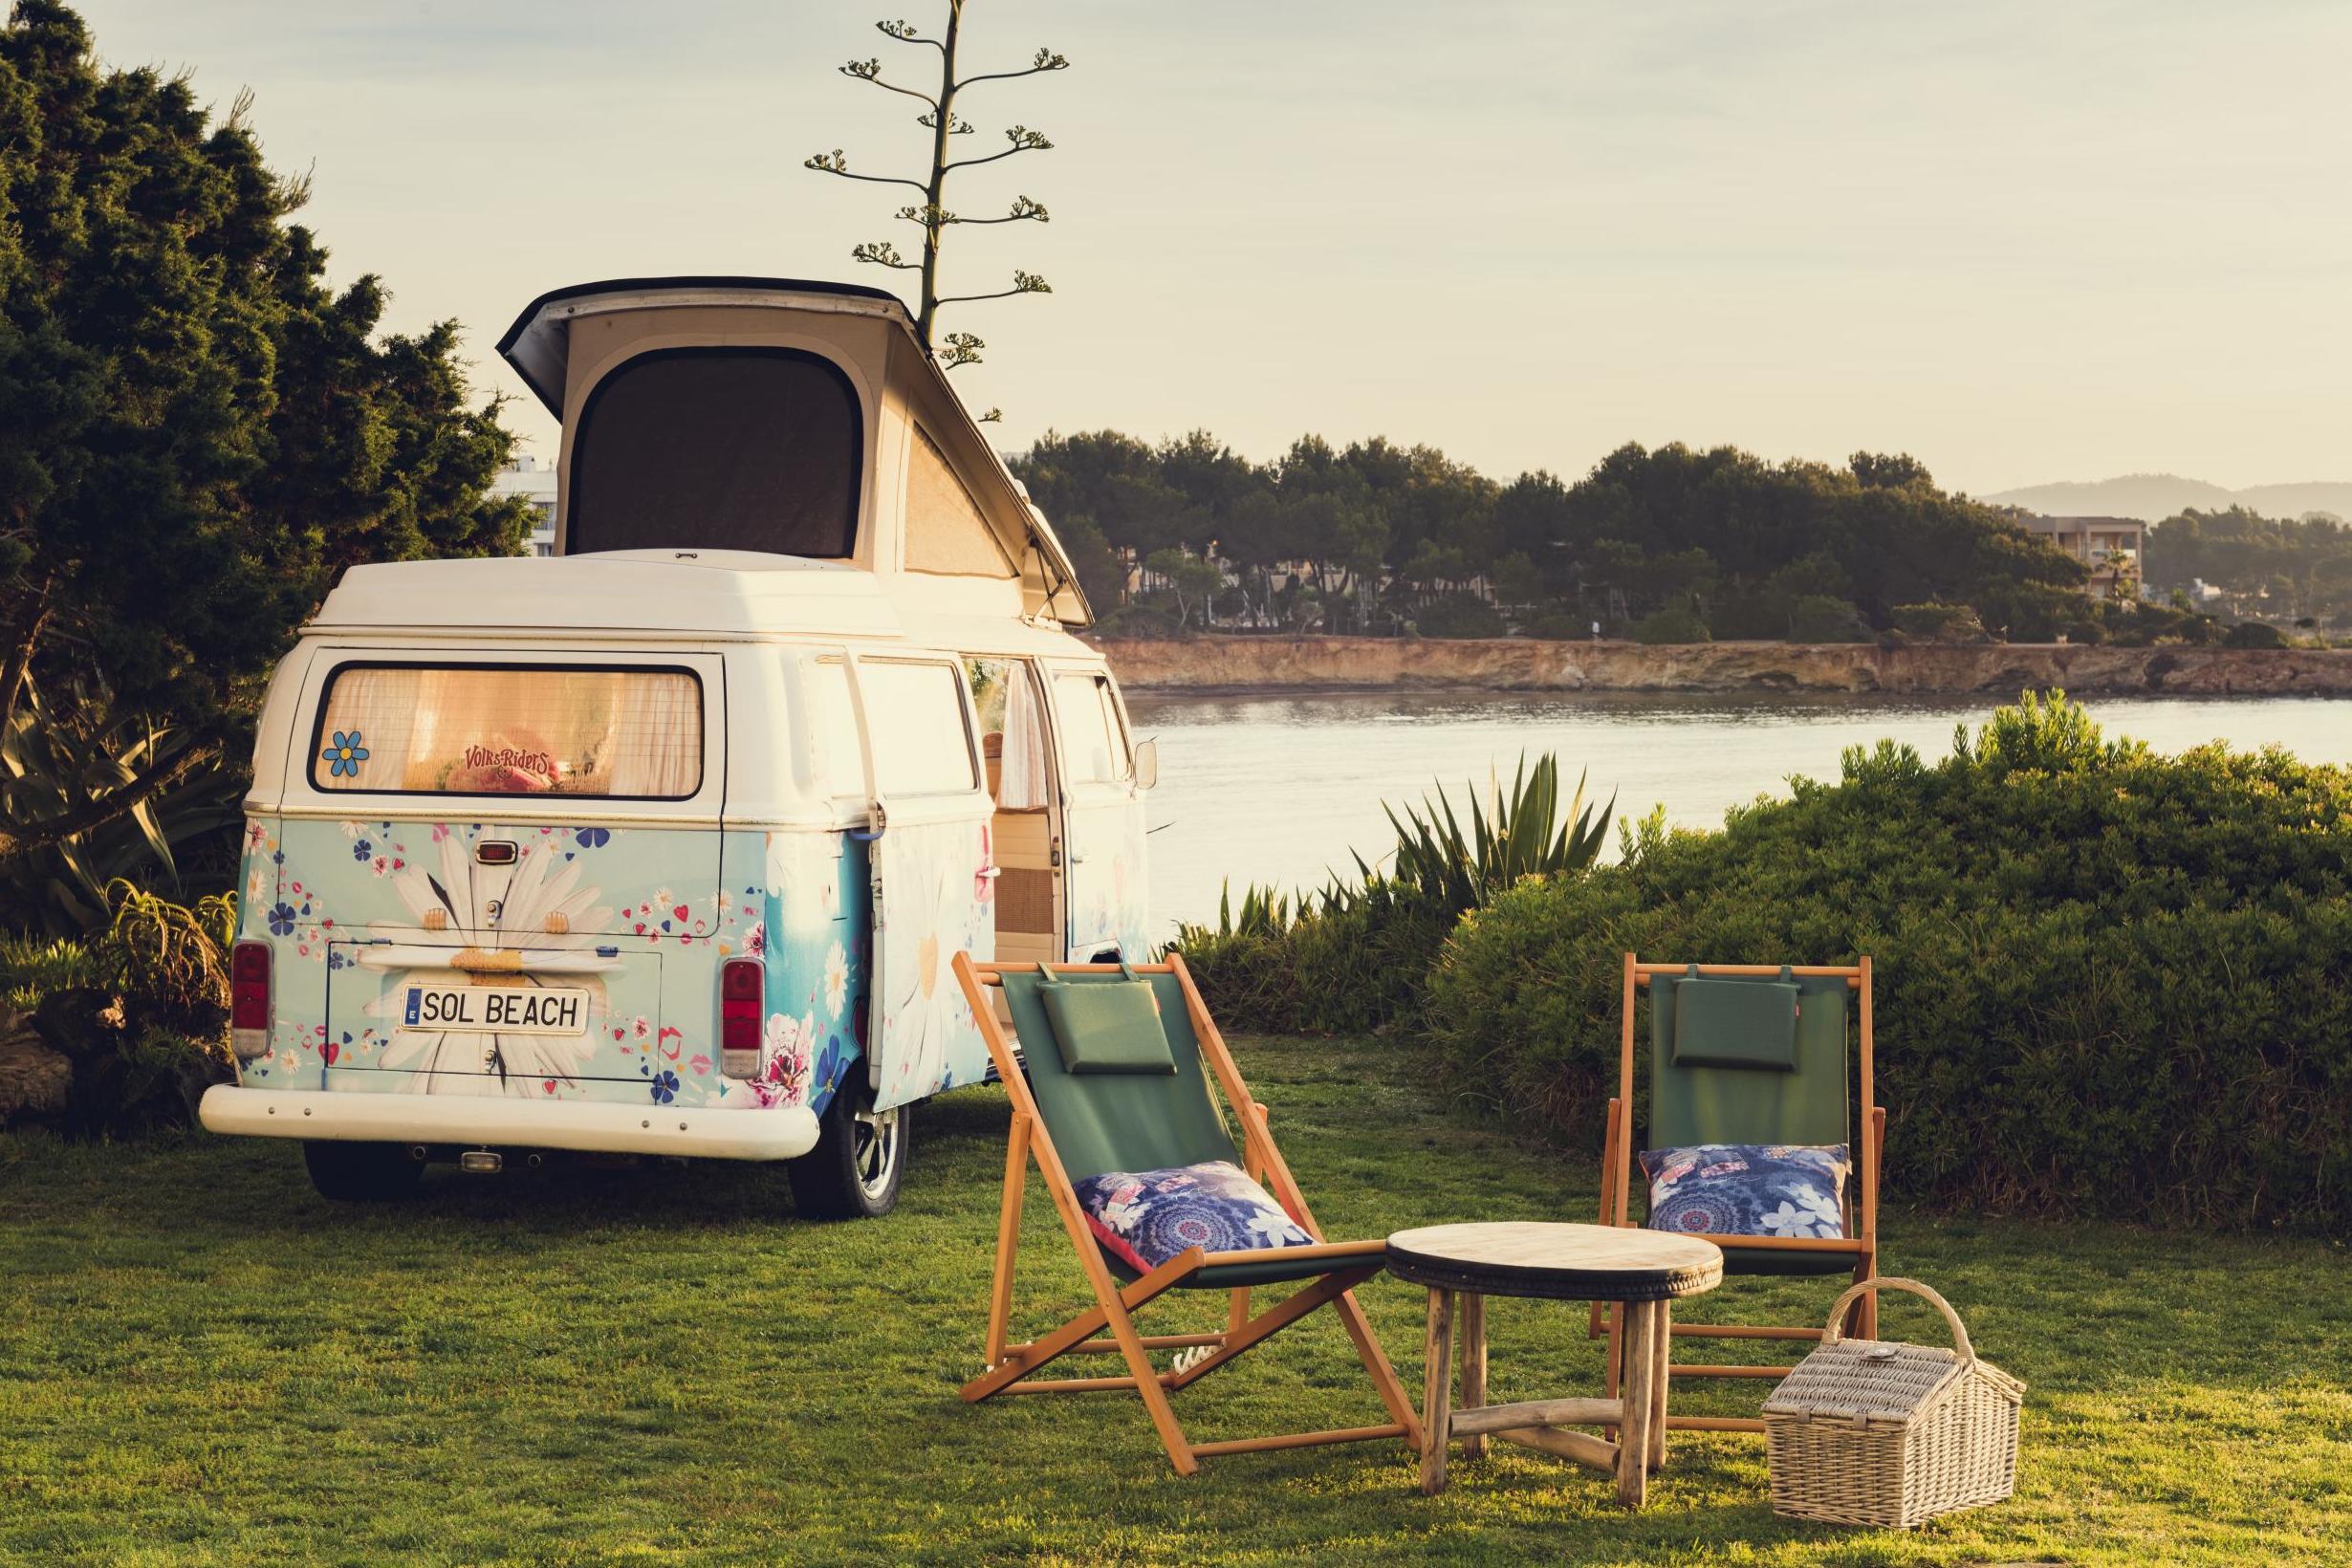 The ultimate glamping experience